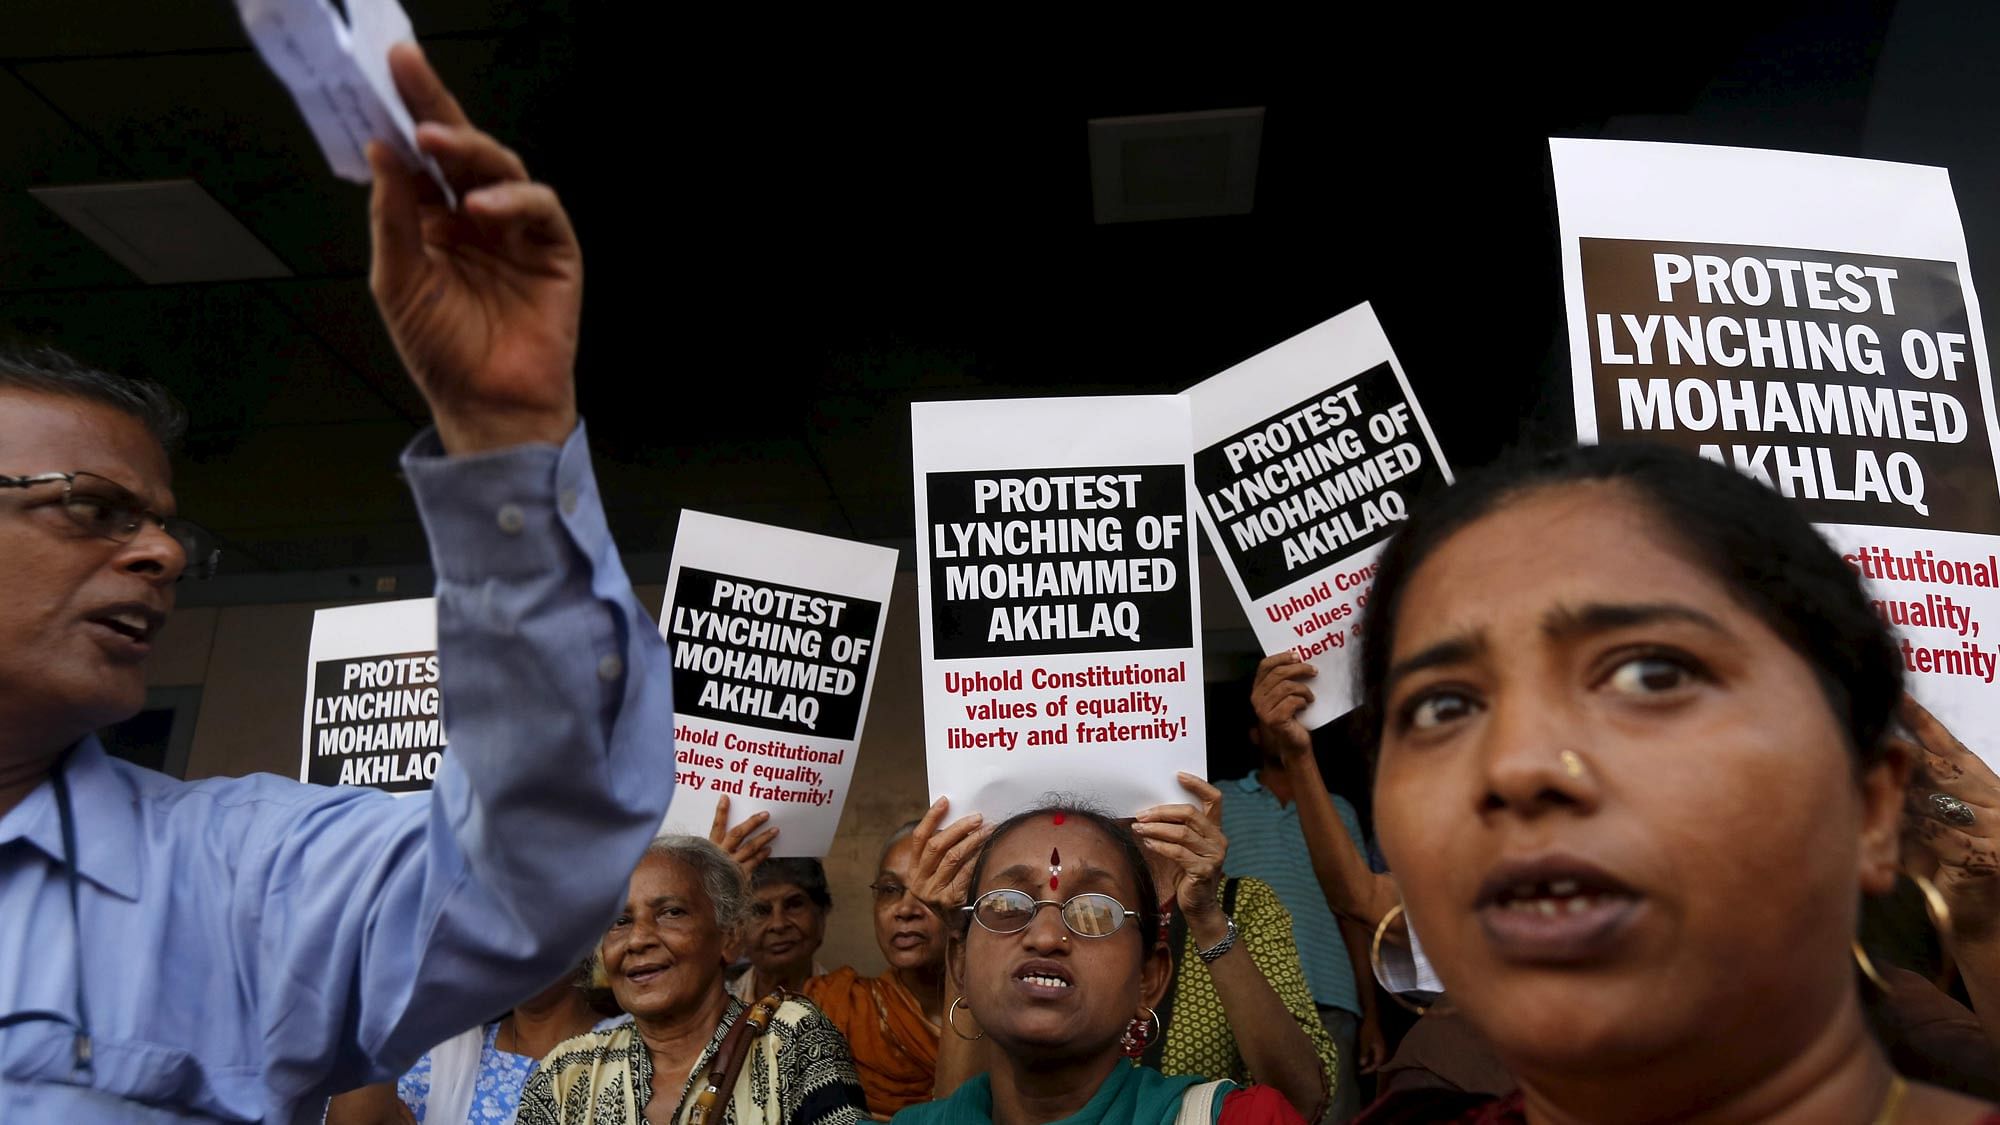 Demonstrators shout slogans as they carry placards during a protest against the killing of Mohammed Akhlaq, in Mumbai. Image used for representational purpose only. (Photo: Reuters)